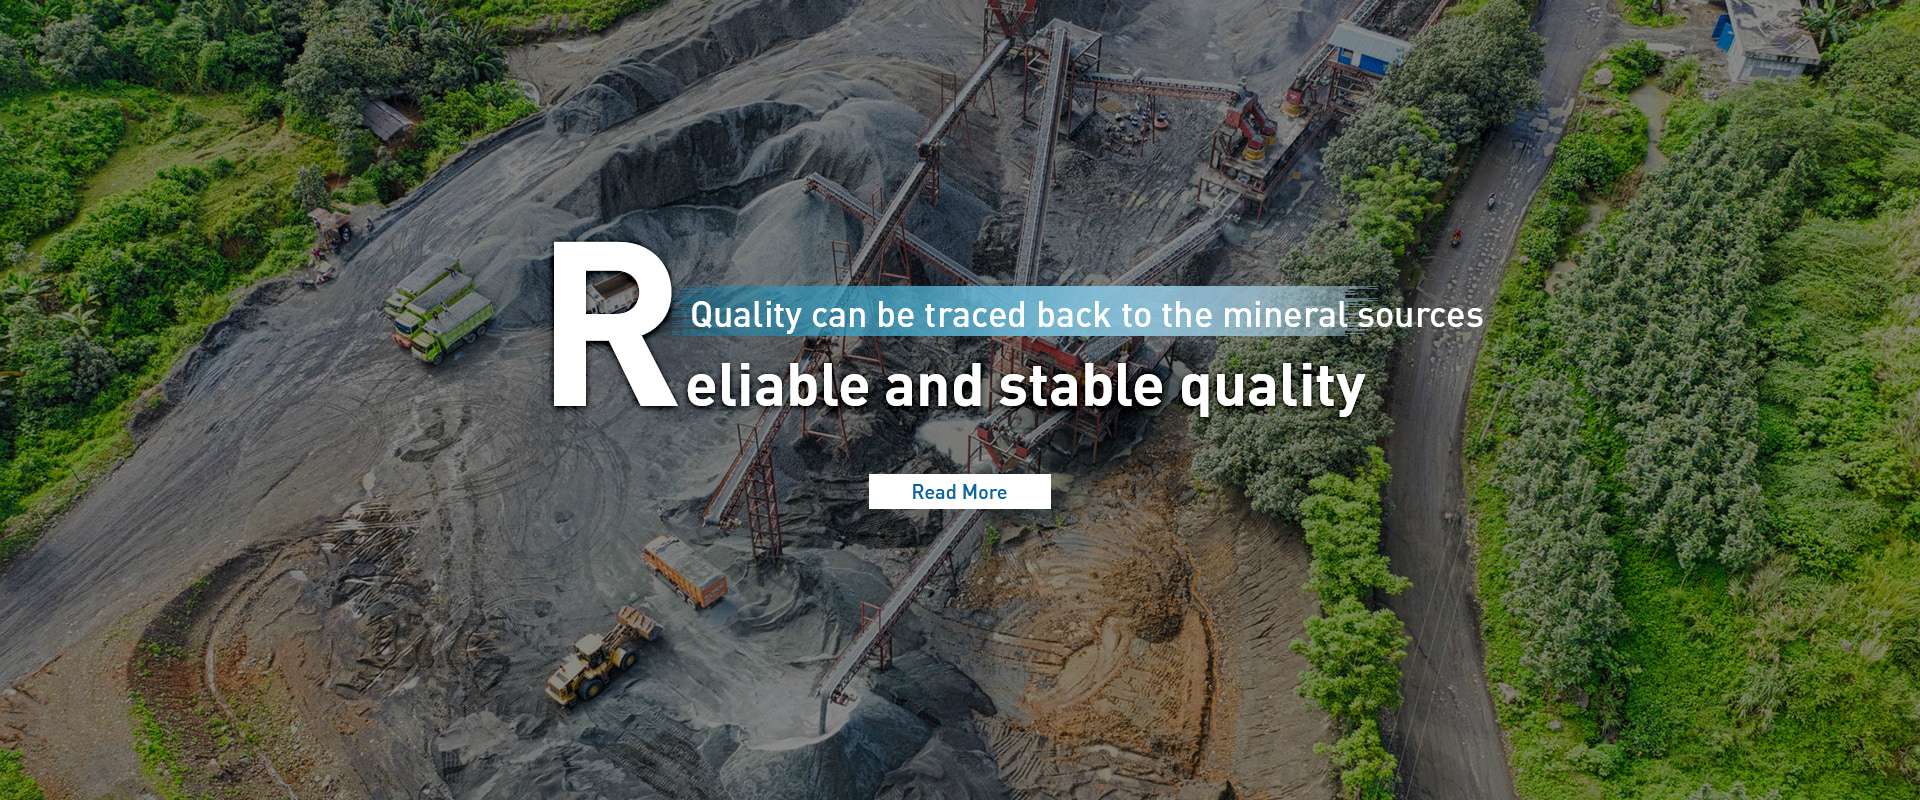 The quality can be tracked back to the mineral resources